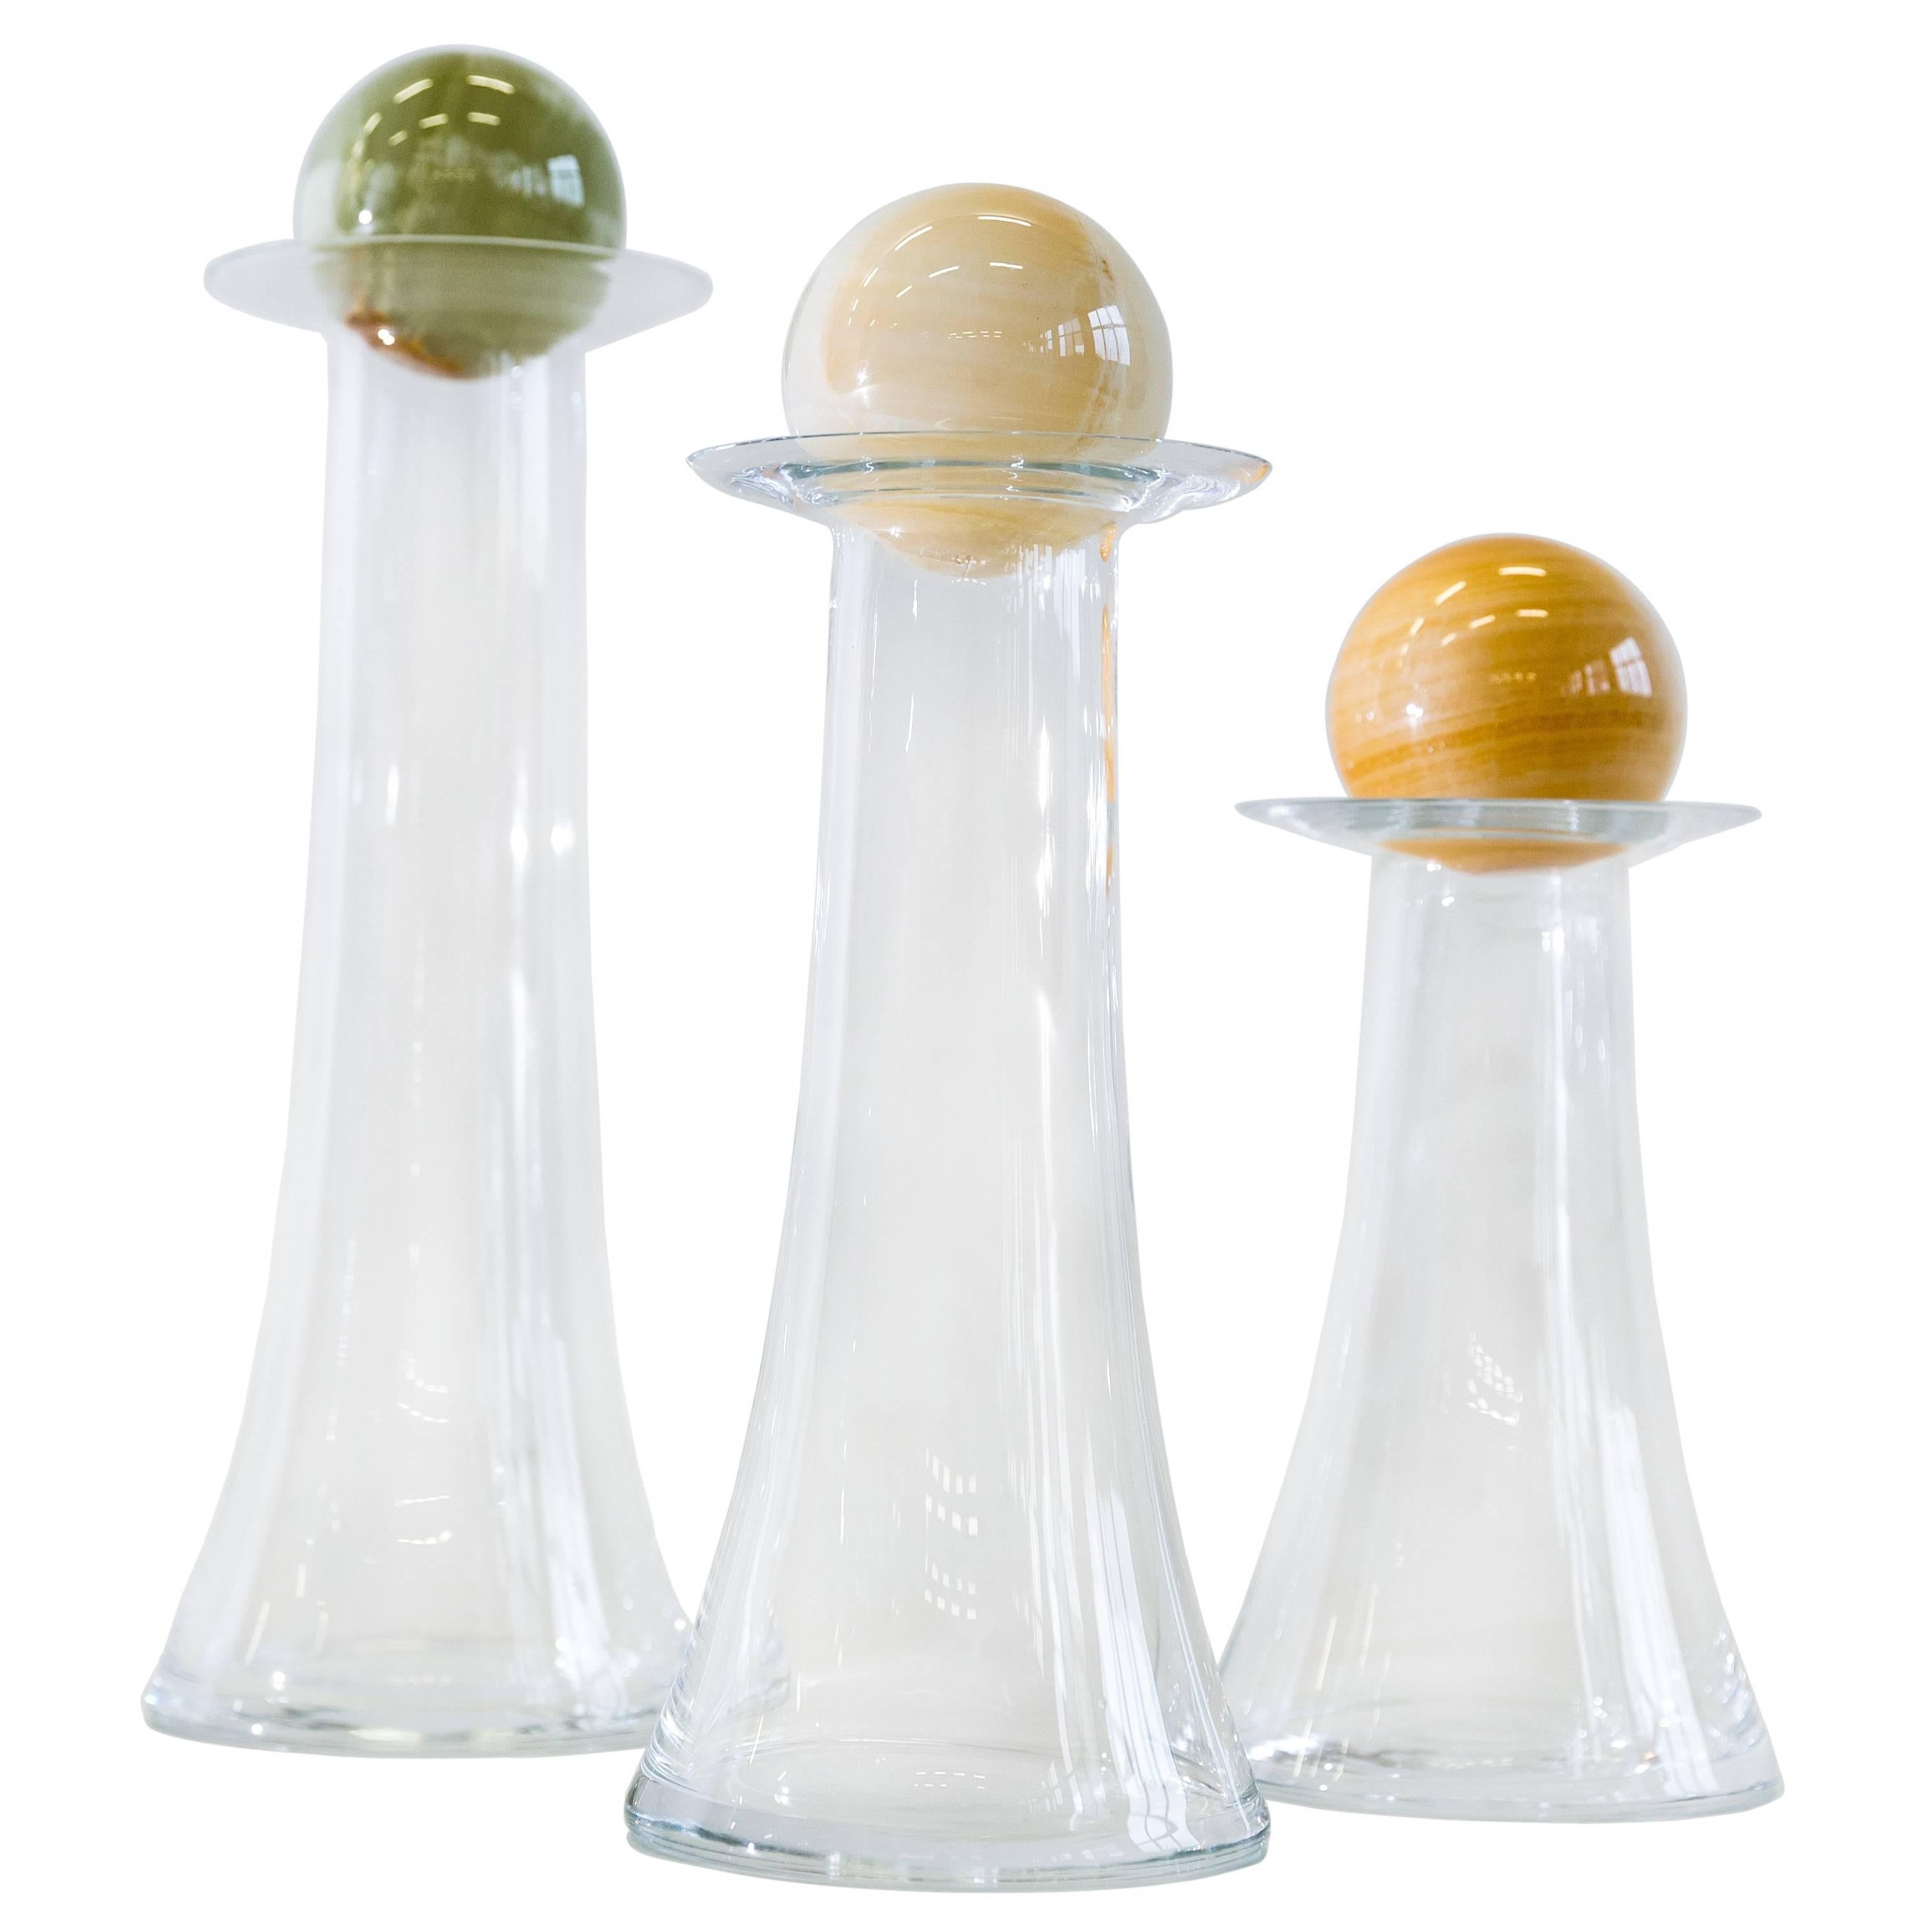 Set of 3 Planetario Crystal Glass Bottles with Spherical Onyx by Ars Fabricandi For Sale